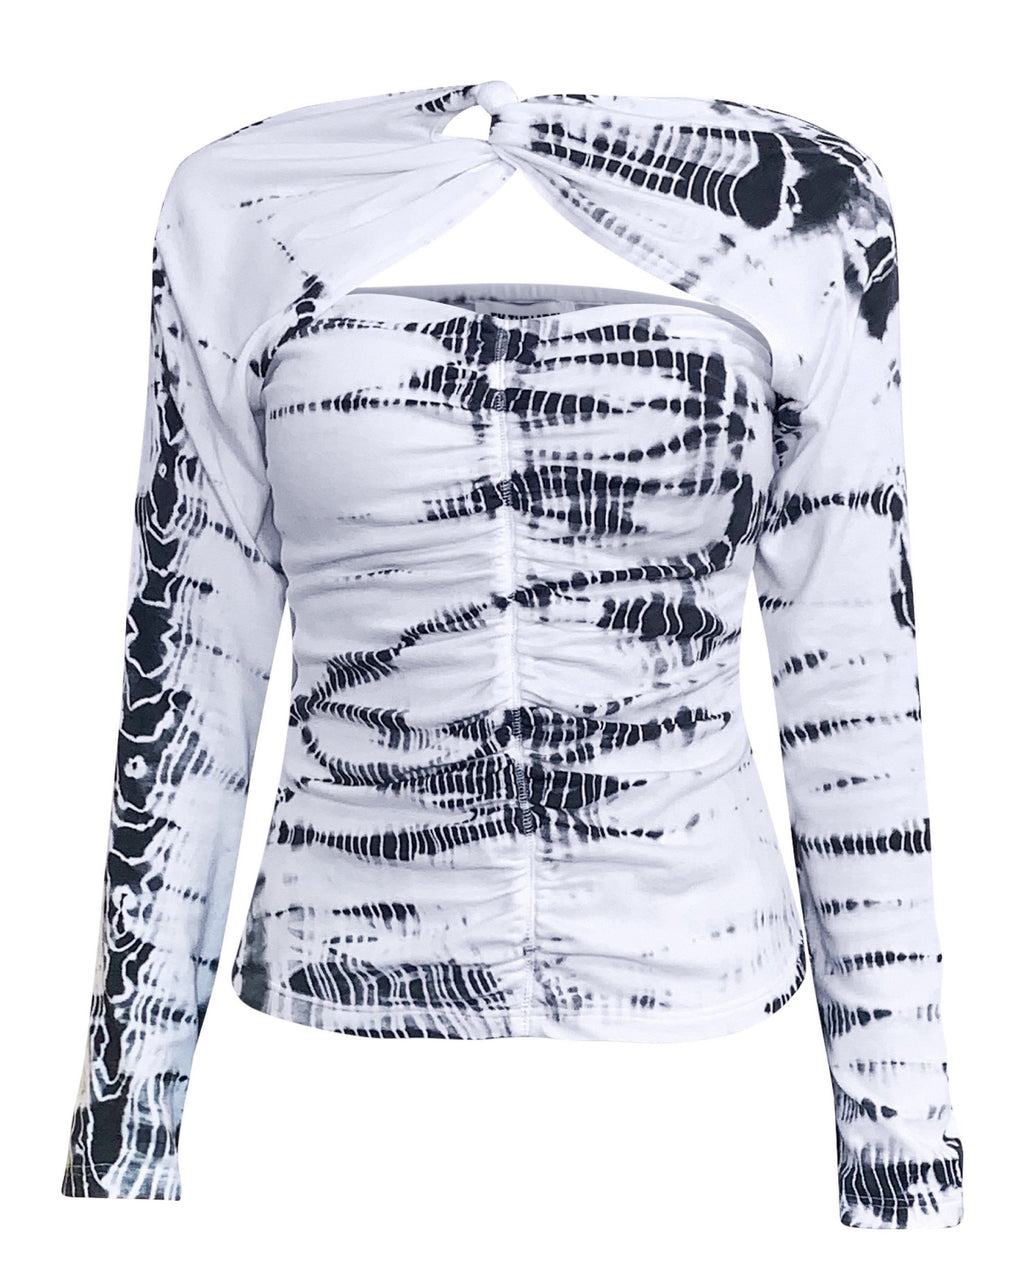 black and white tie dye top